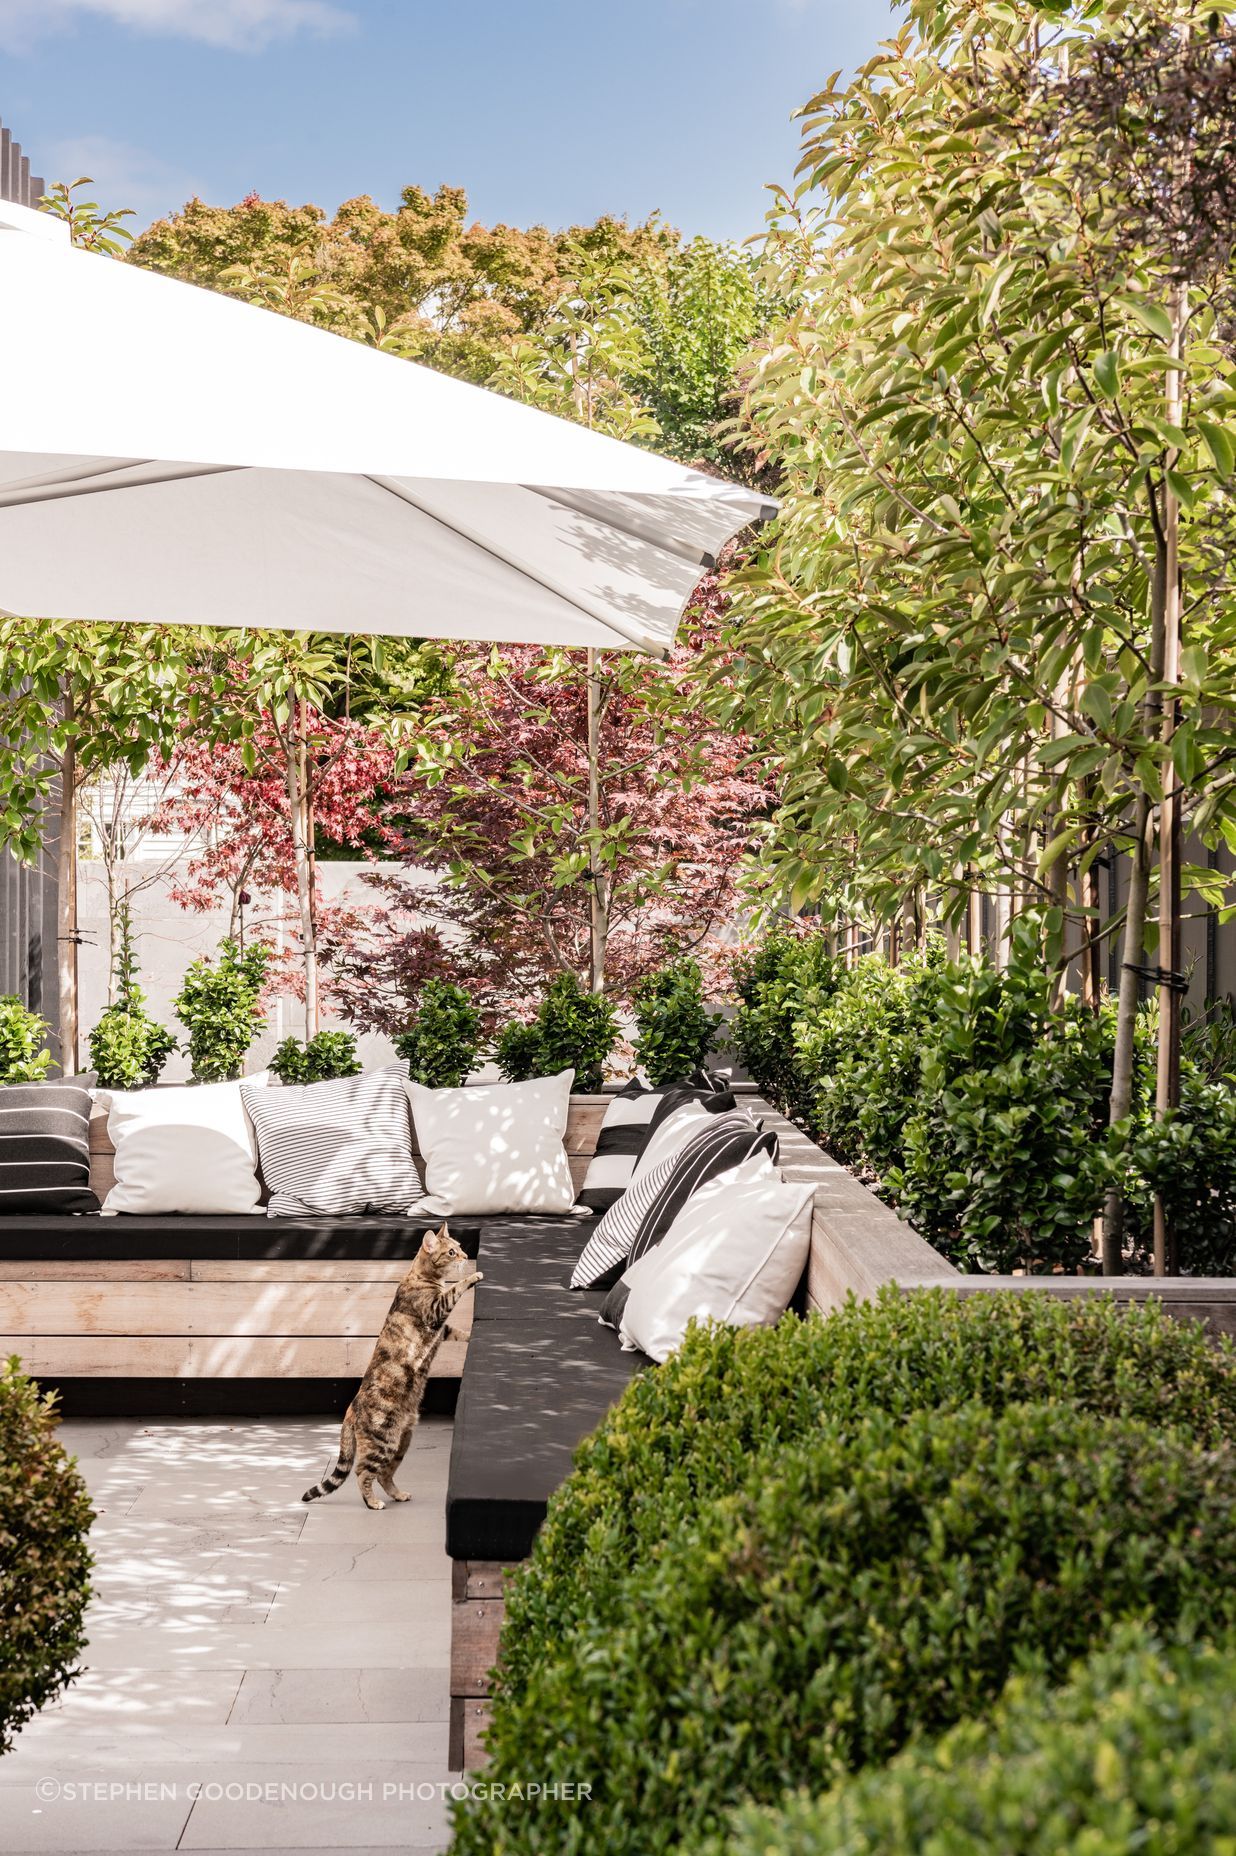 Landscaping surrounds an entertaining area at the side of the property.